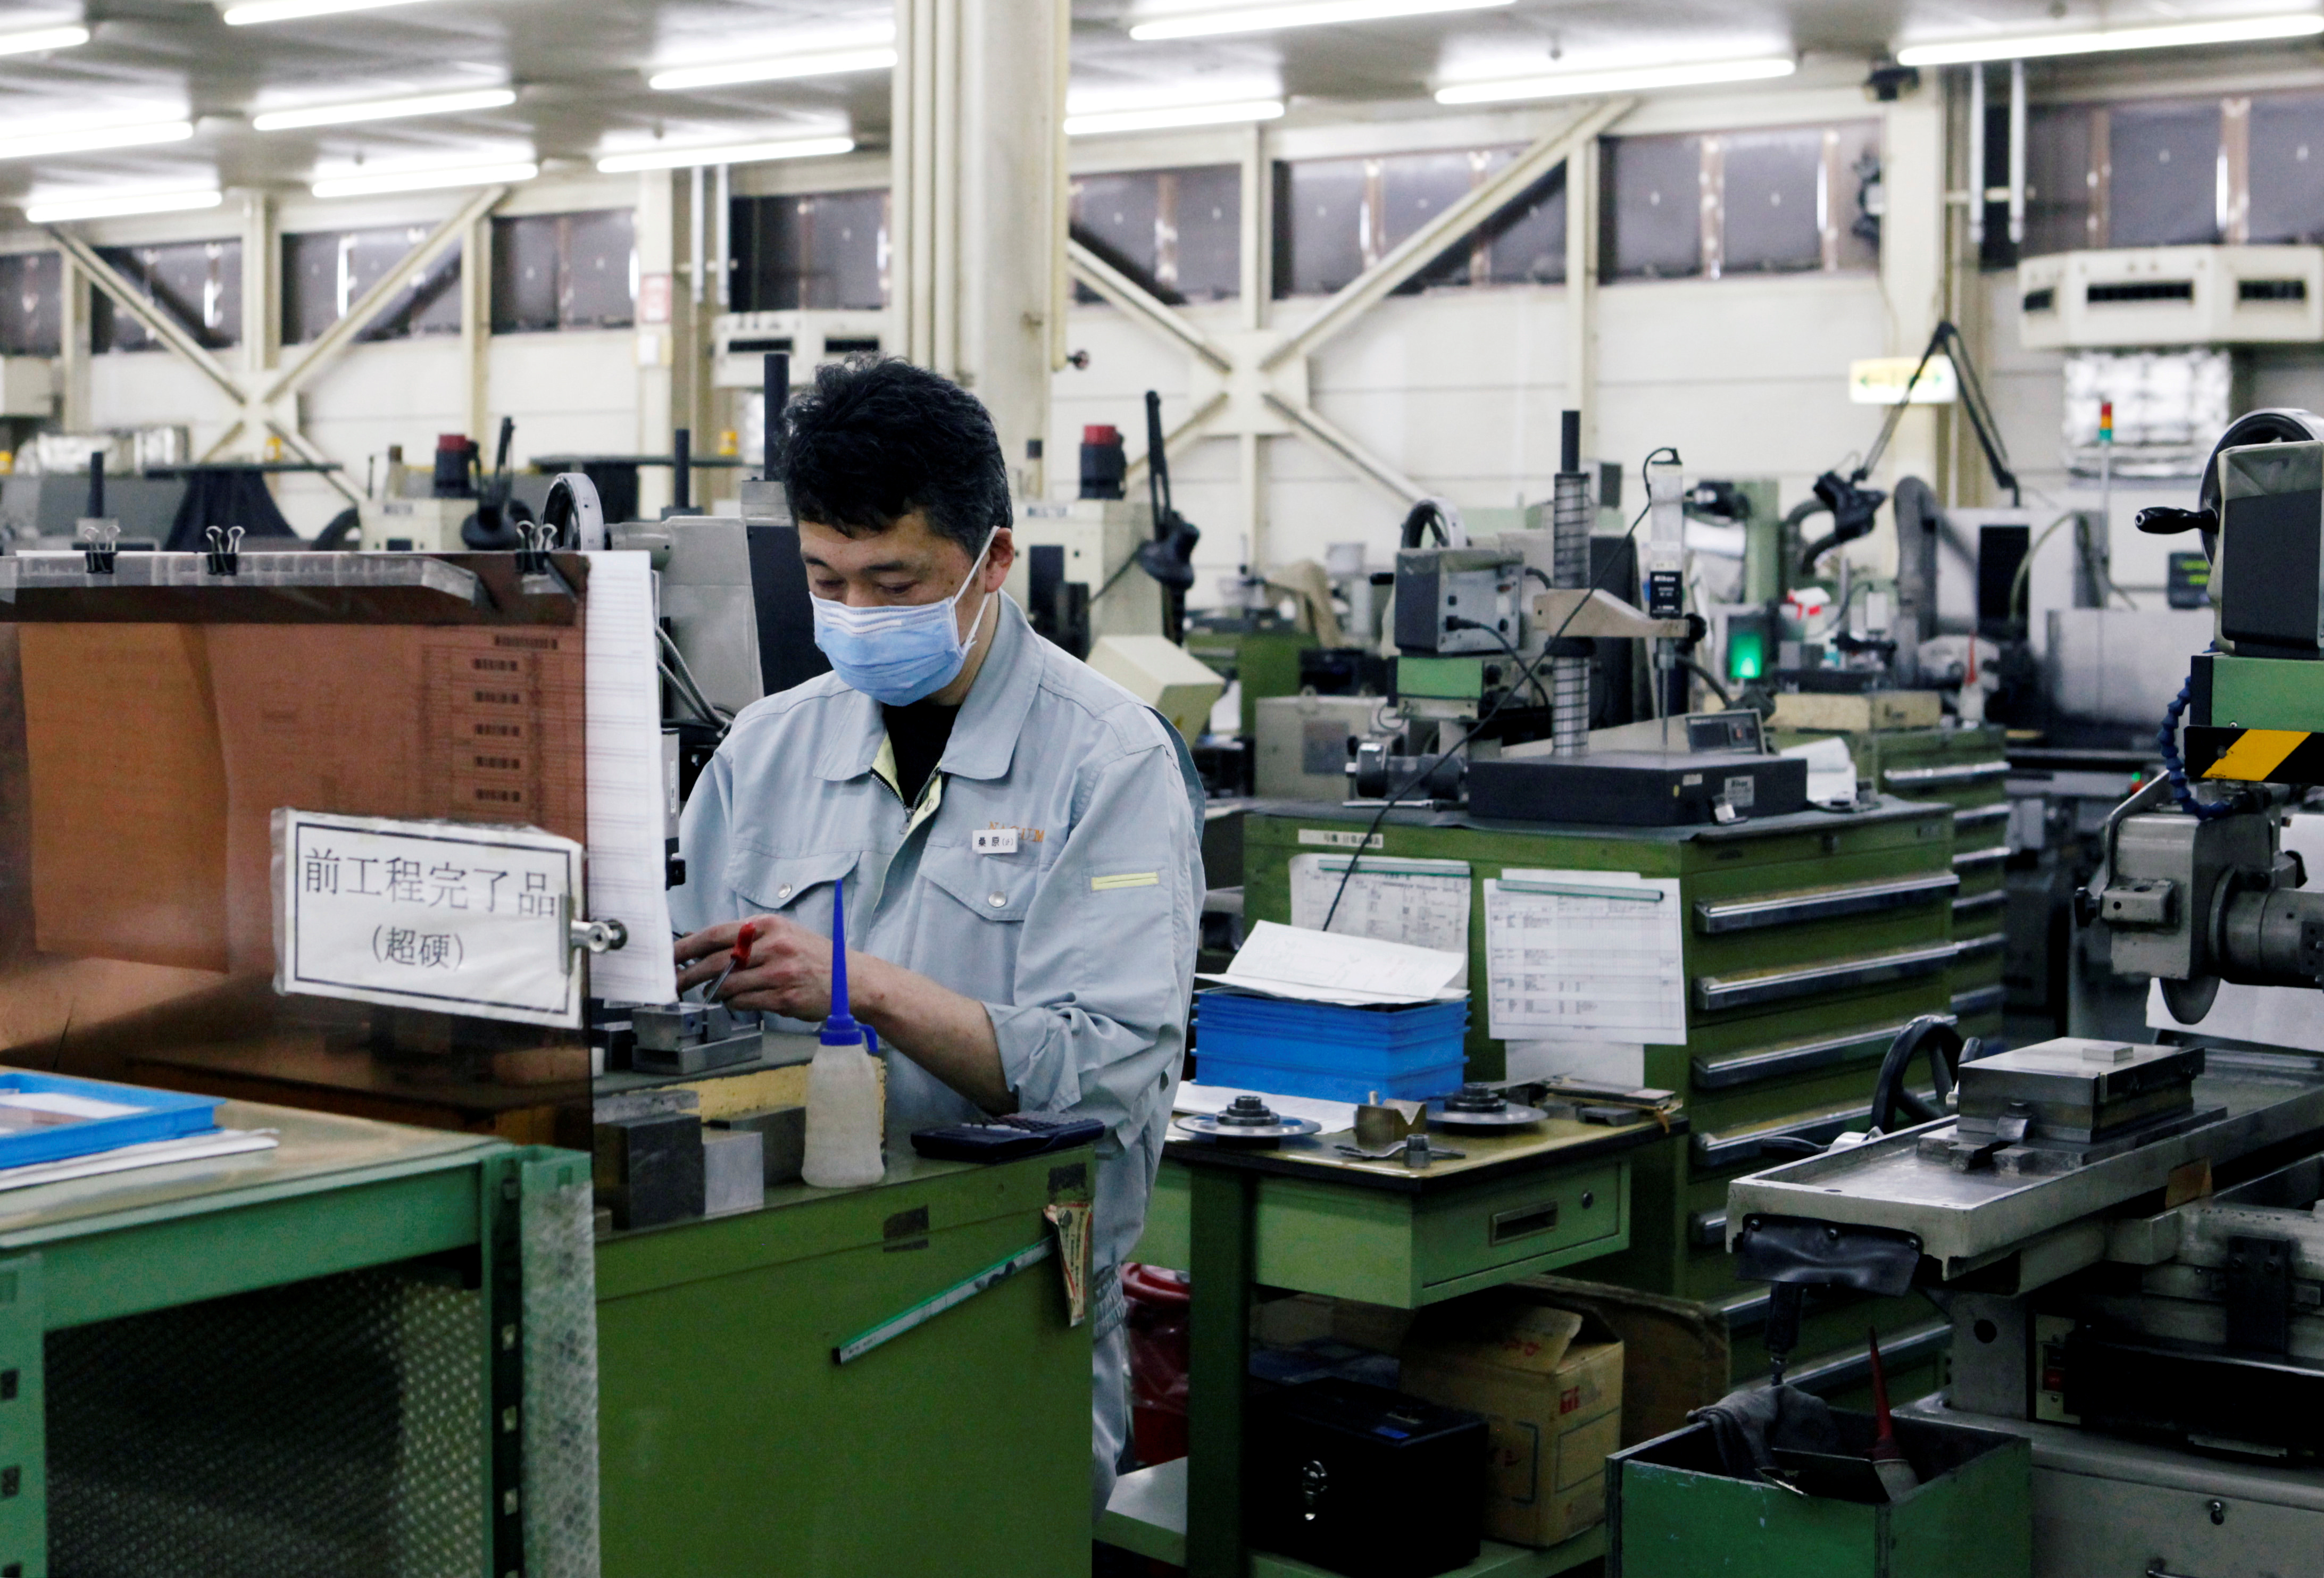 A worker is seen at the factory of Nagumo Seisakusho Co., Ltd. in Jyoetsu